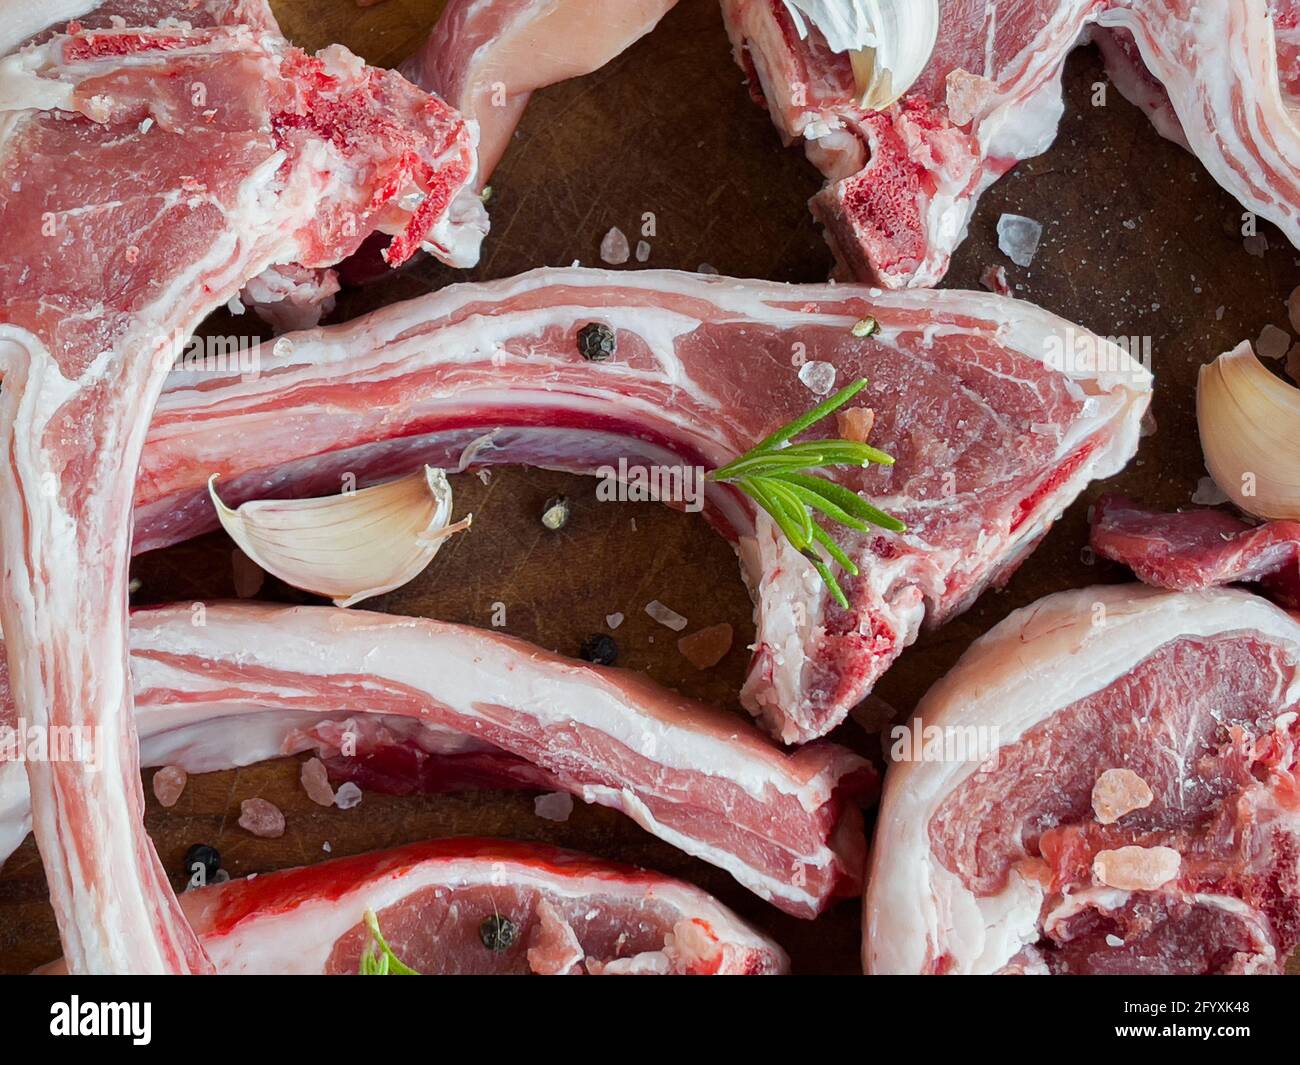 Raw lamb ribs with rosemary, garlic, salt and black pepper ready to be grilled Stock Photo